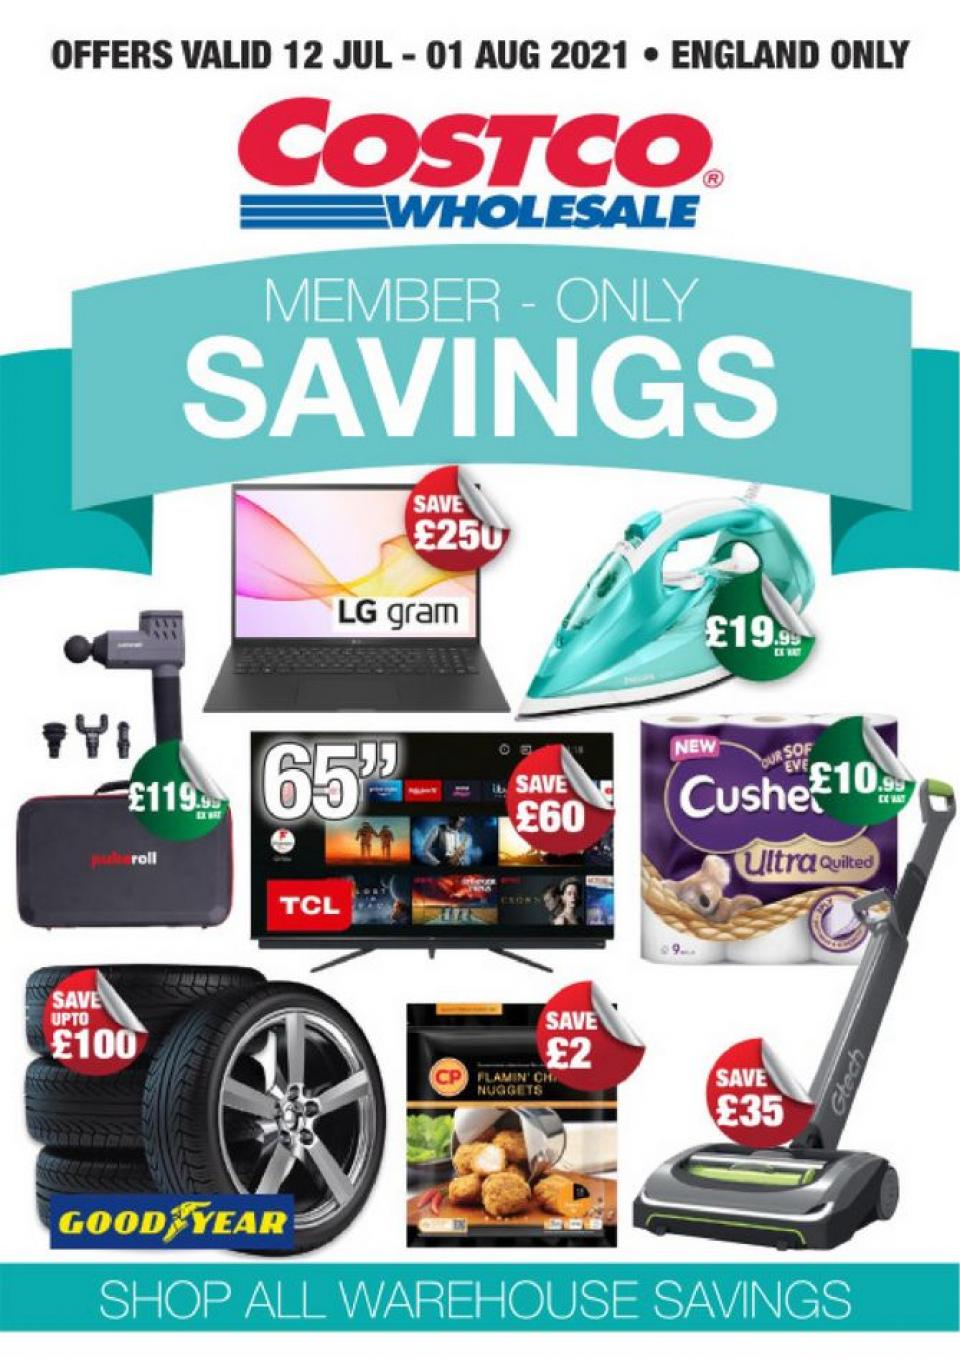 Costco Offers Member-Only Savings 12 Jul – 1 Aug 2021